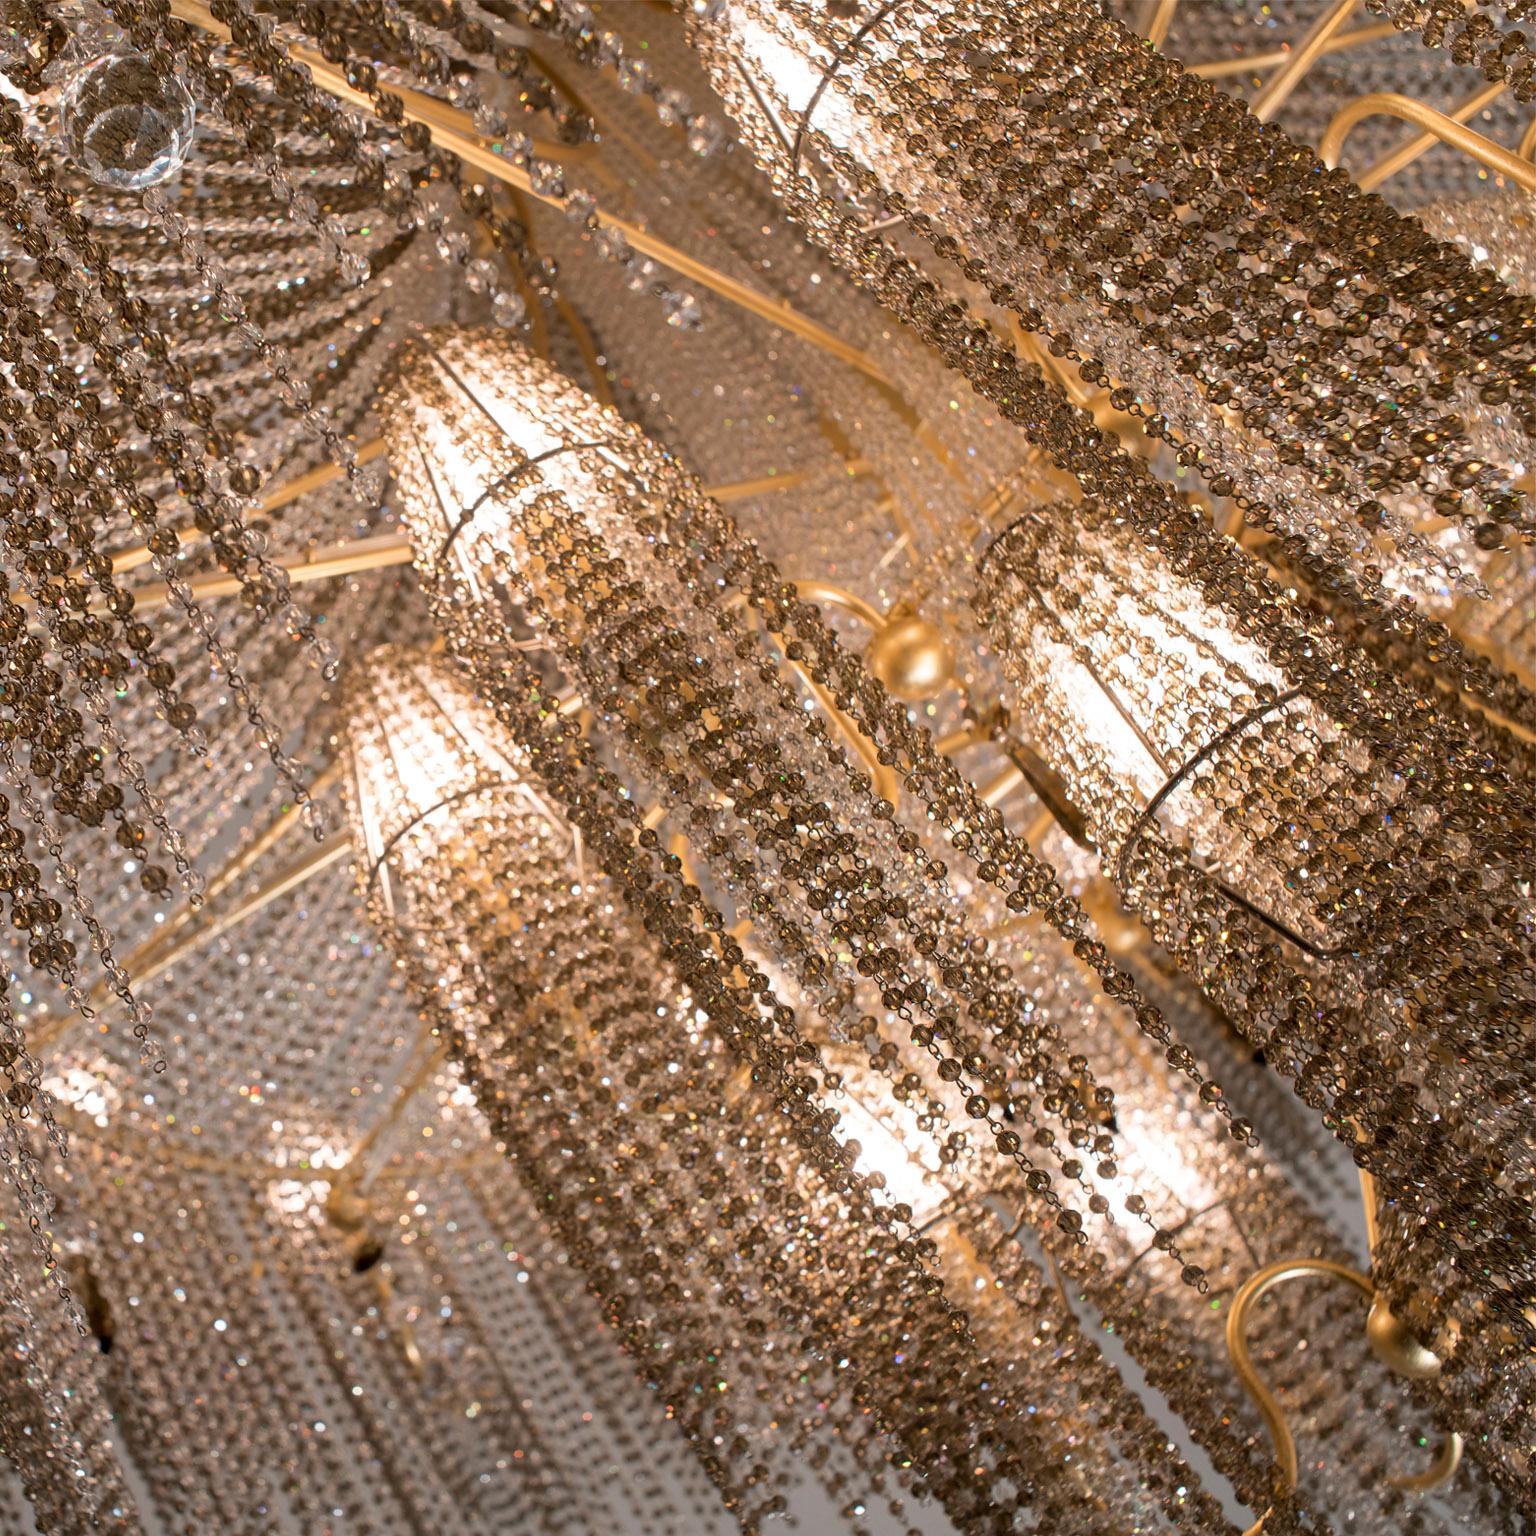 Italian 21st Century Burlesque Gold Leaf Chandelier and Crystals by Patrizia Garganti For Sale